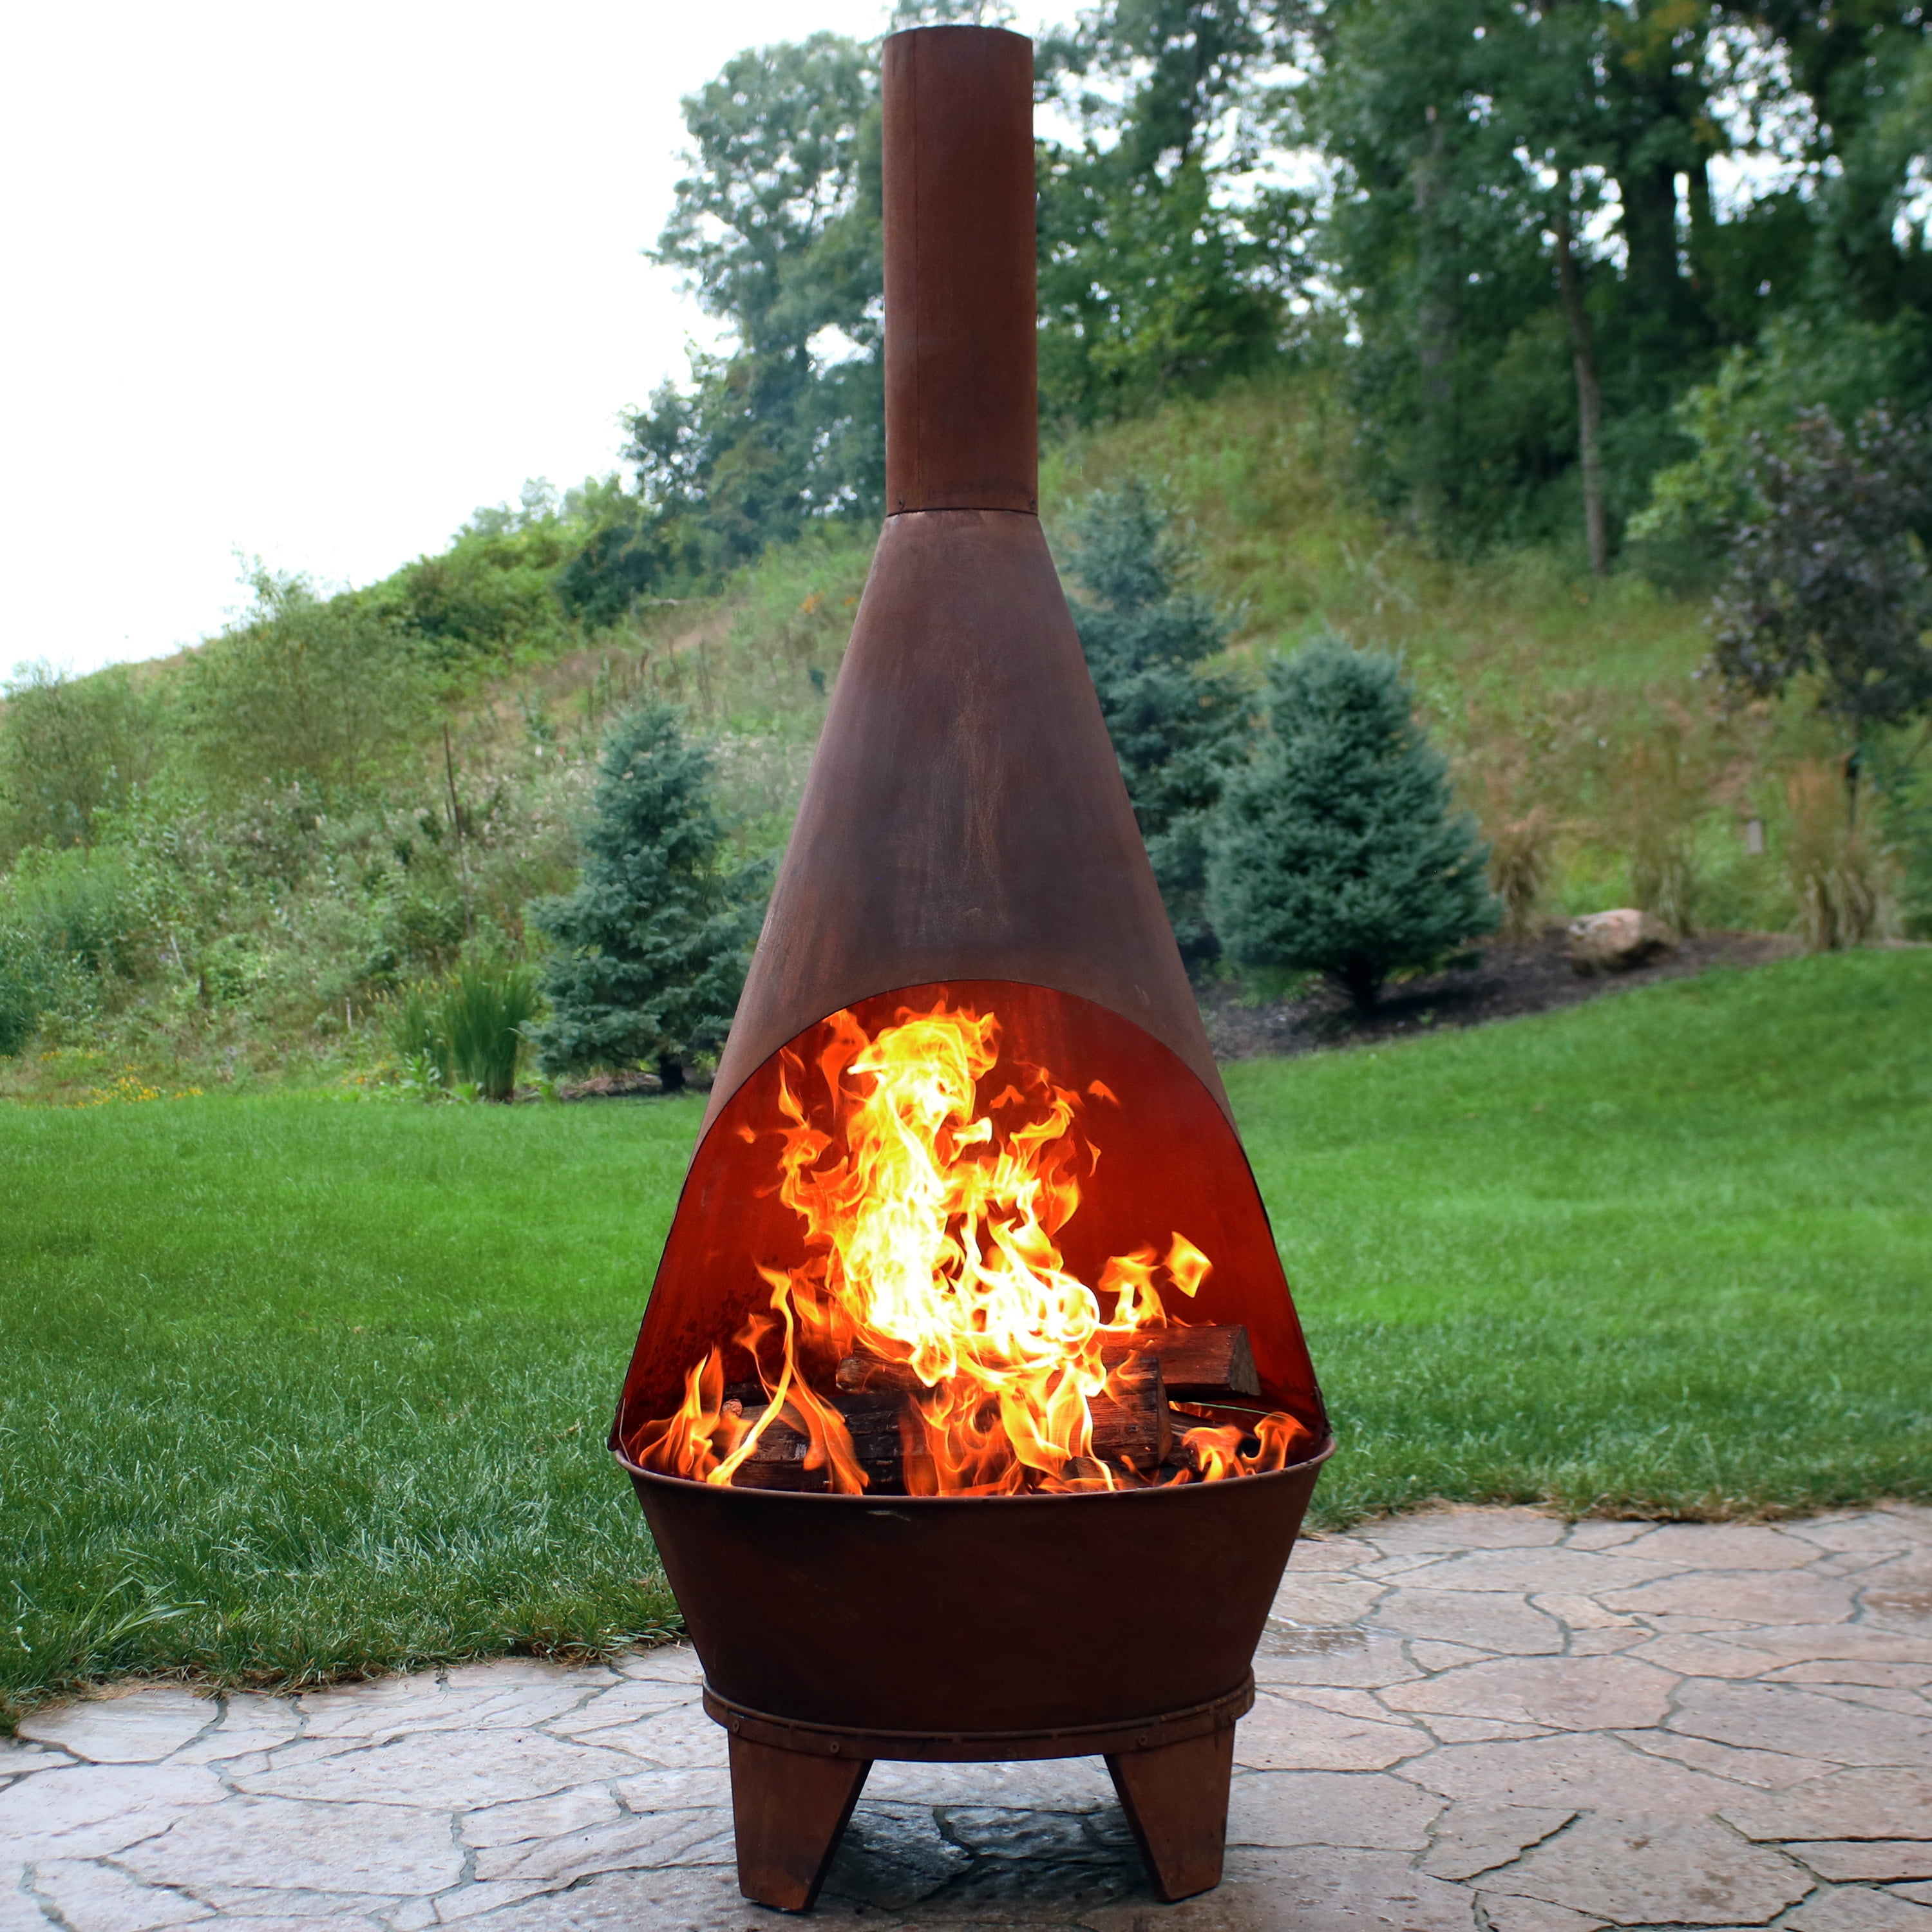 Large Outdoor Patio Wood Burning, Large Outdoor Wood Burning Fire Pits